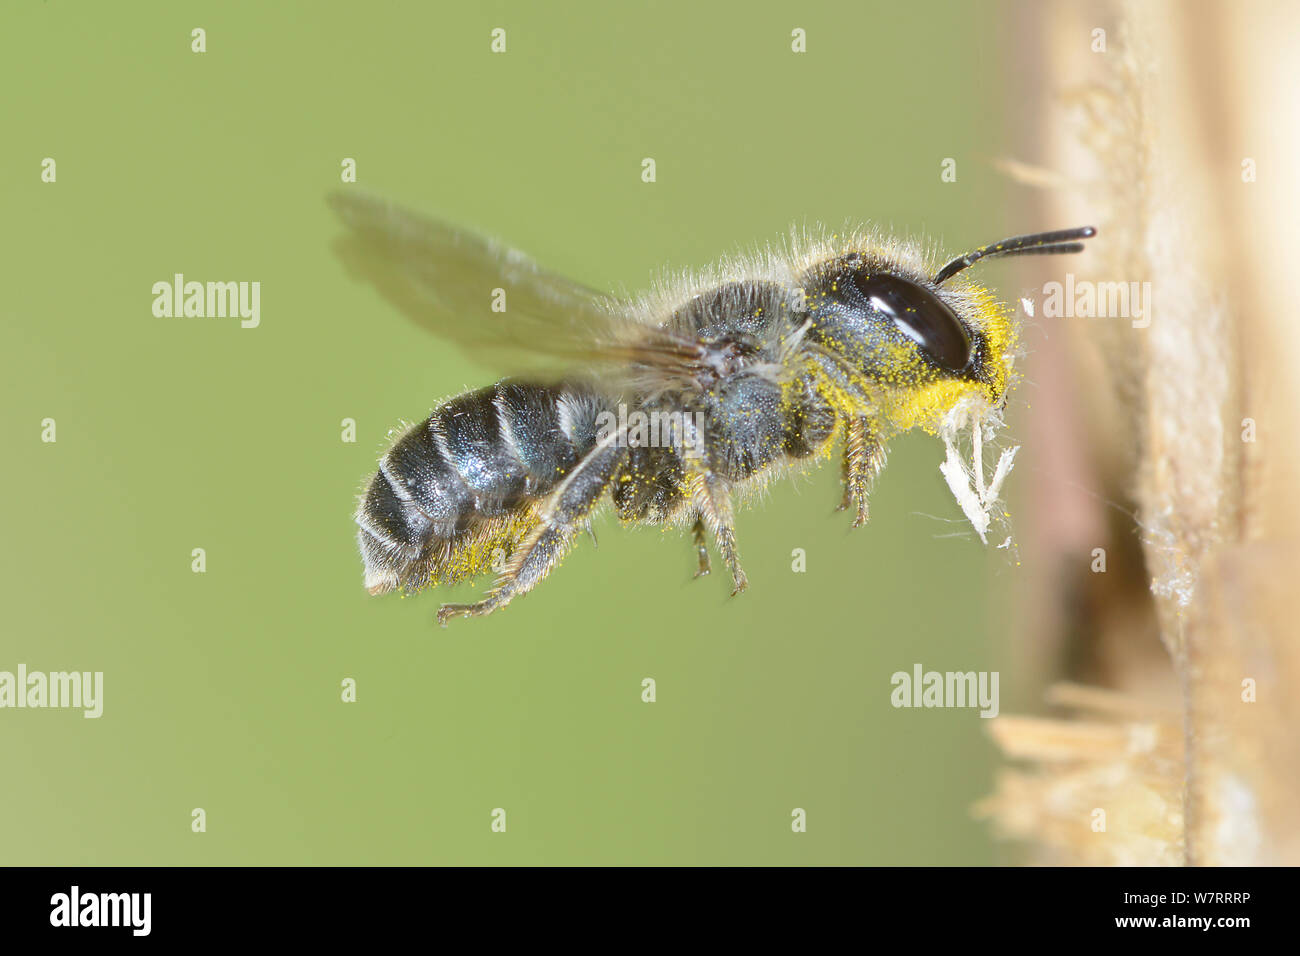 Female Blue mason bee (Osmia caerulescens) covered in pollen flying into an insect box in a garden, carrying bits of wood to seal nest cells, Hertfordshire, England, June. Stock Photo